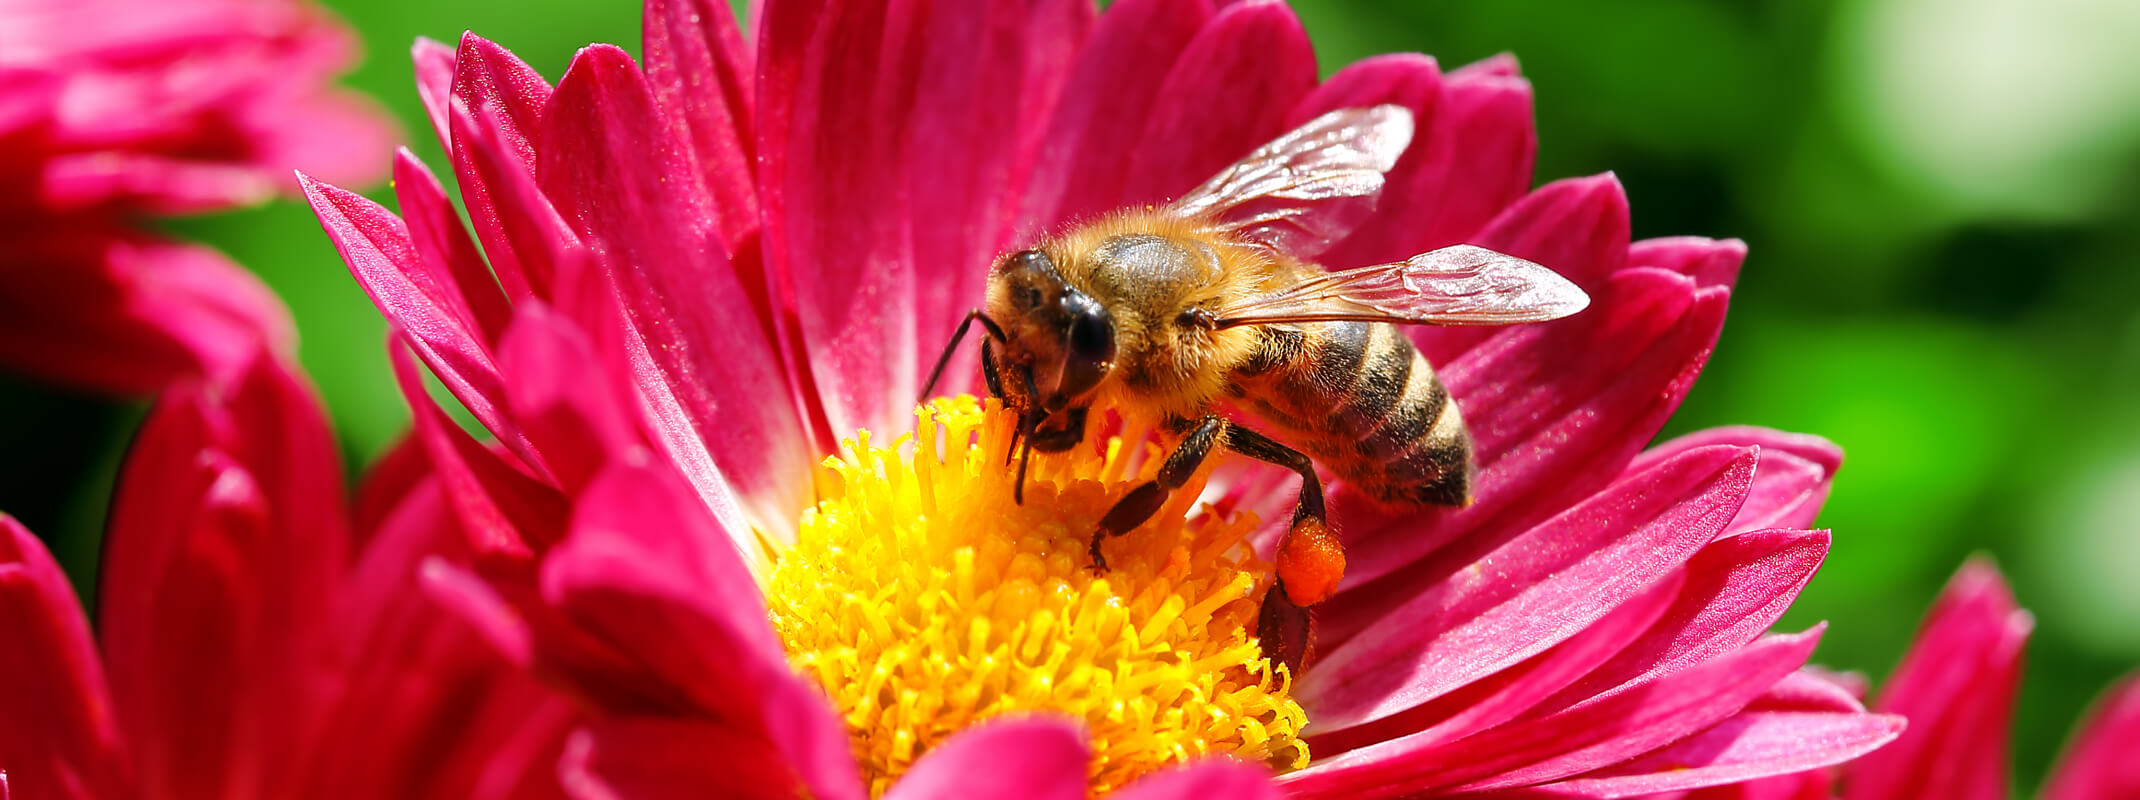 A bee sitting in the middle of a bright pink flower